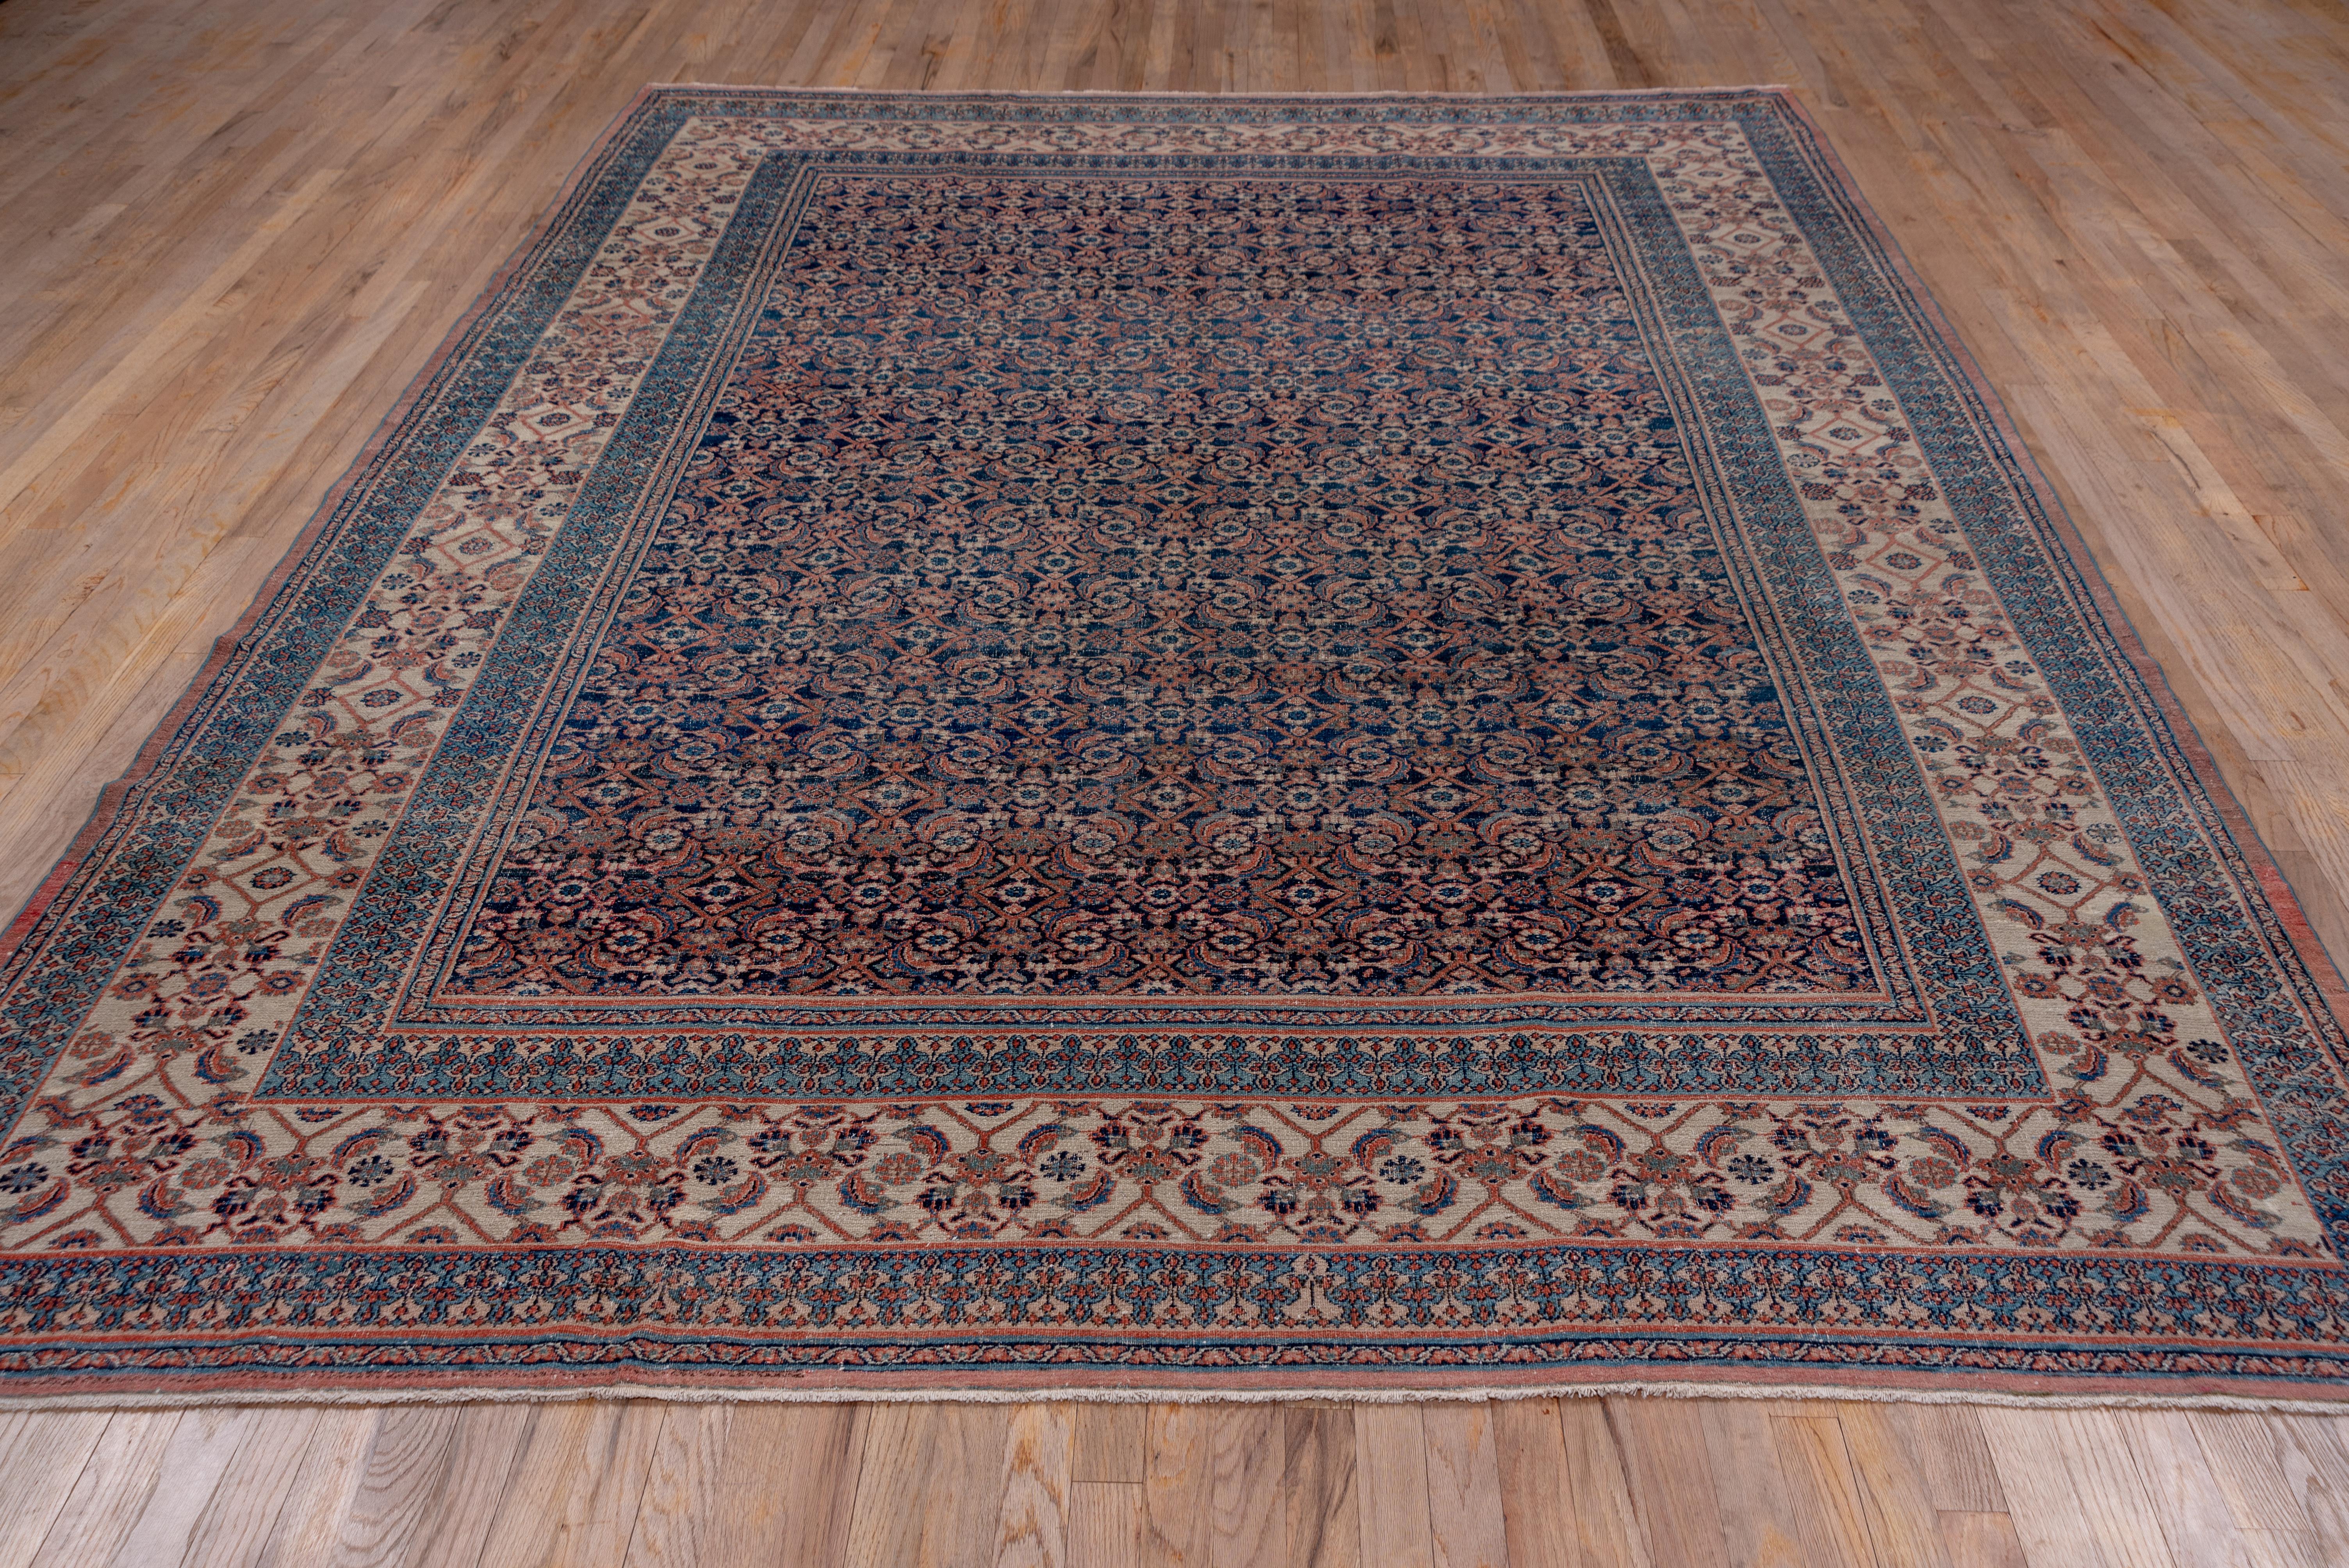 This well-worn NE Persian city carpet shows a dark blue ground supporting a close Herati pattern accented in ivory and soft red. The unusual ivory main border has an open-out Herati design emphasizing rosettes in open diamonds.